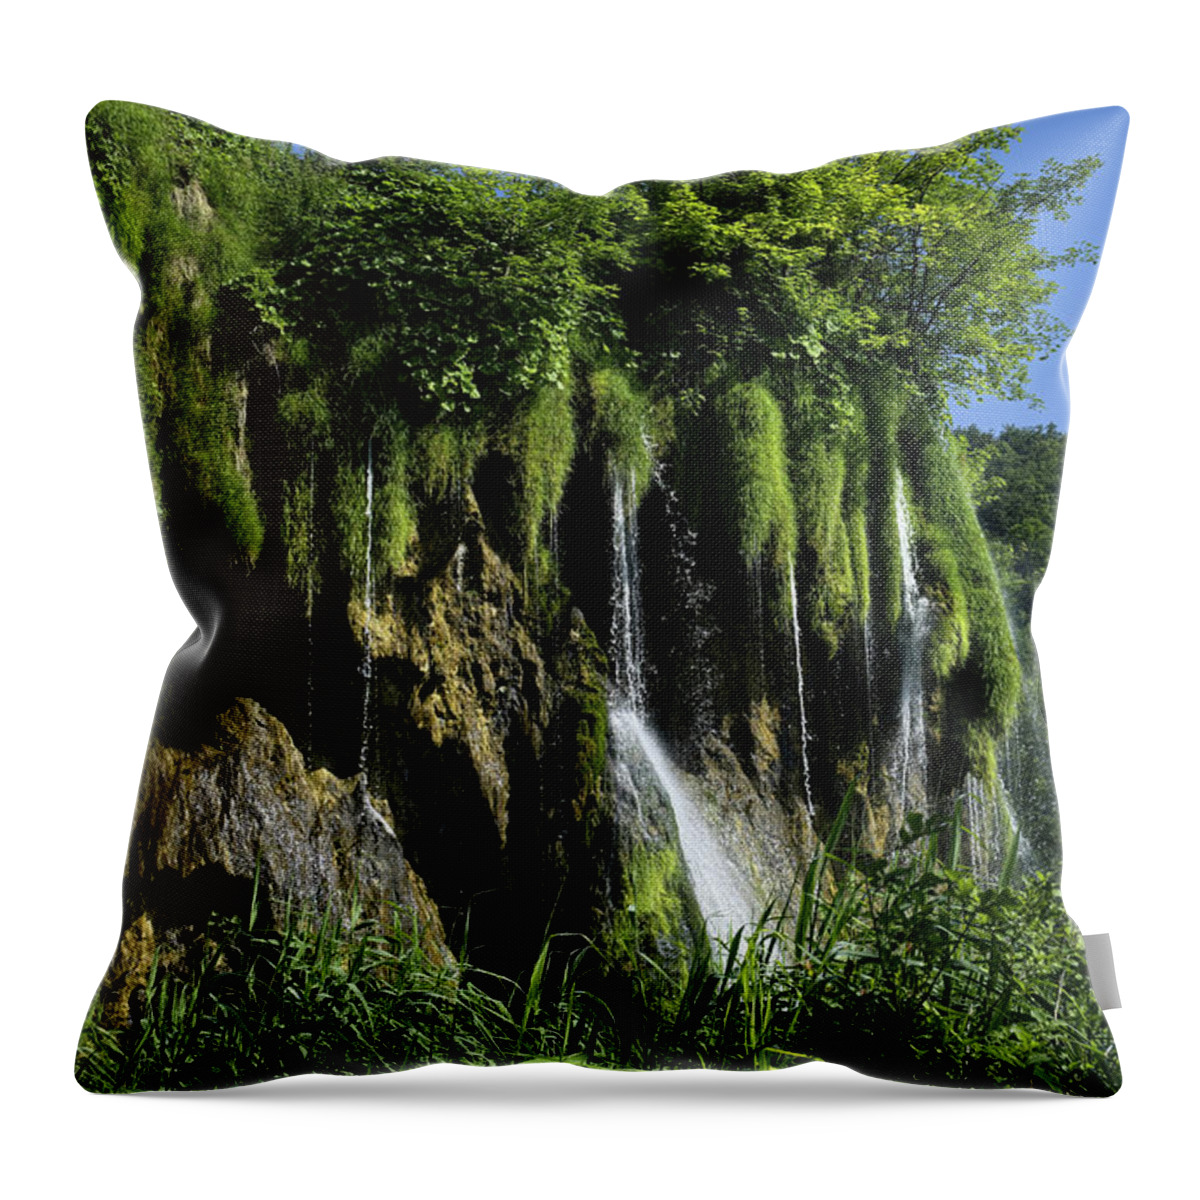 Travel Throw Pillow featuring the photograph Just Drop By Drop by Lucinda Walter